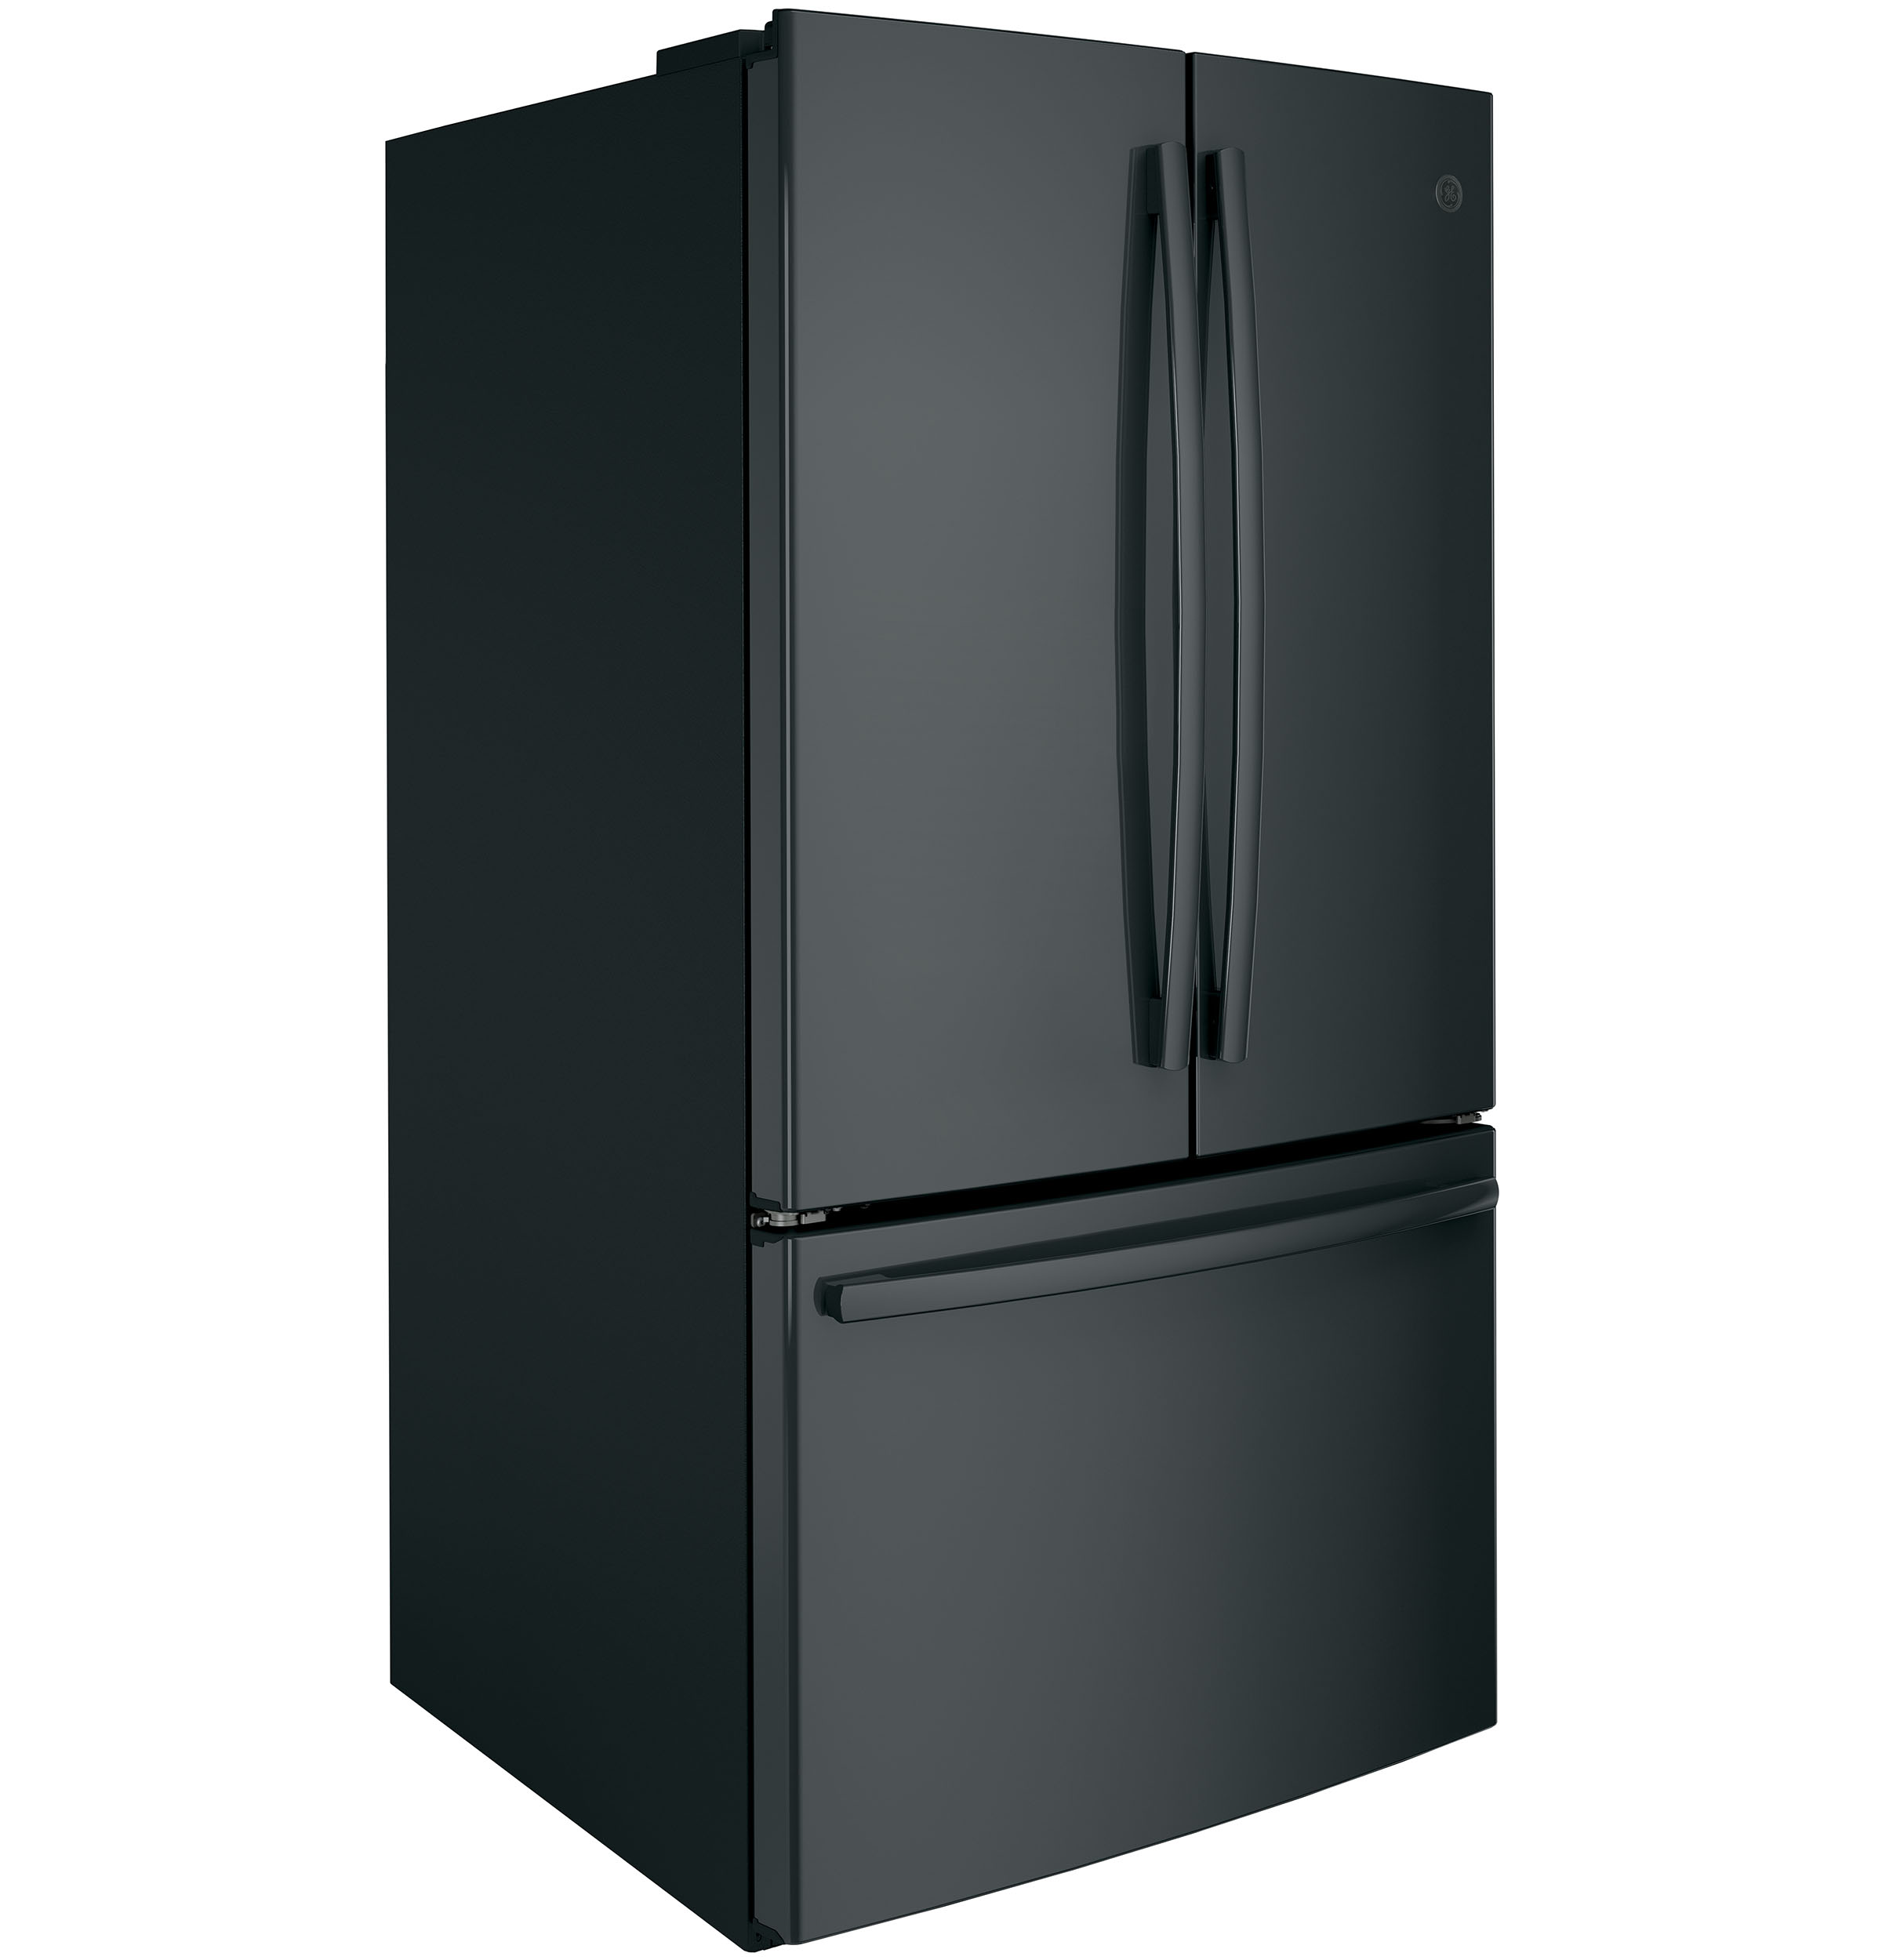 Questions and Answers: GE 27.0 Cu. Ft. French Door Refrigerator with ...